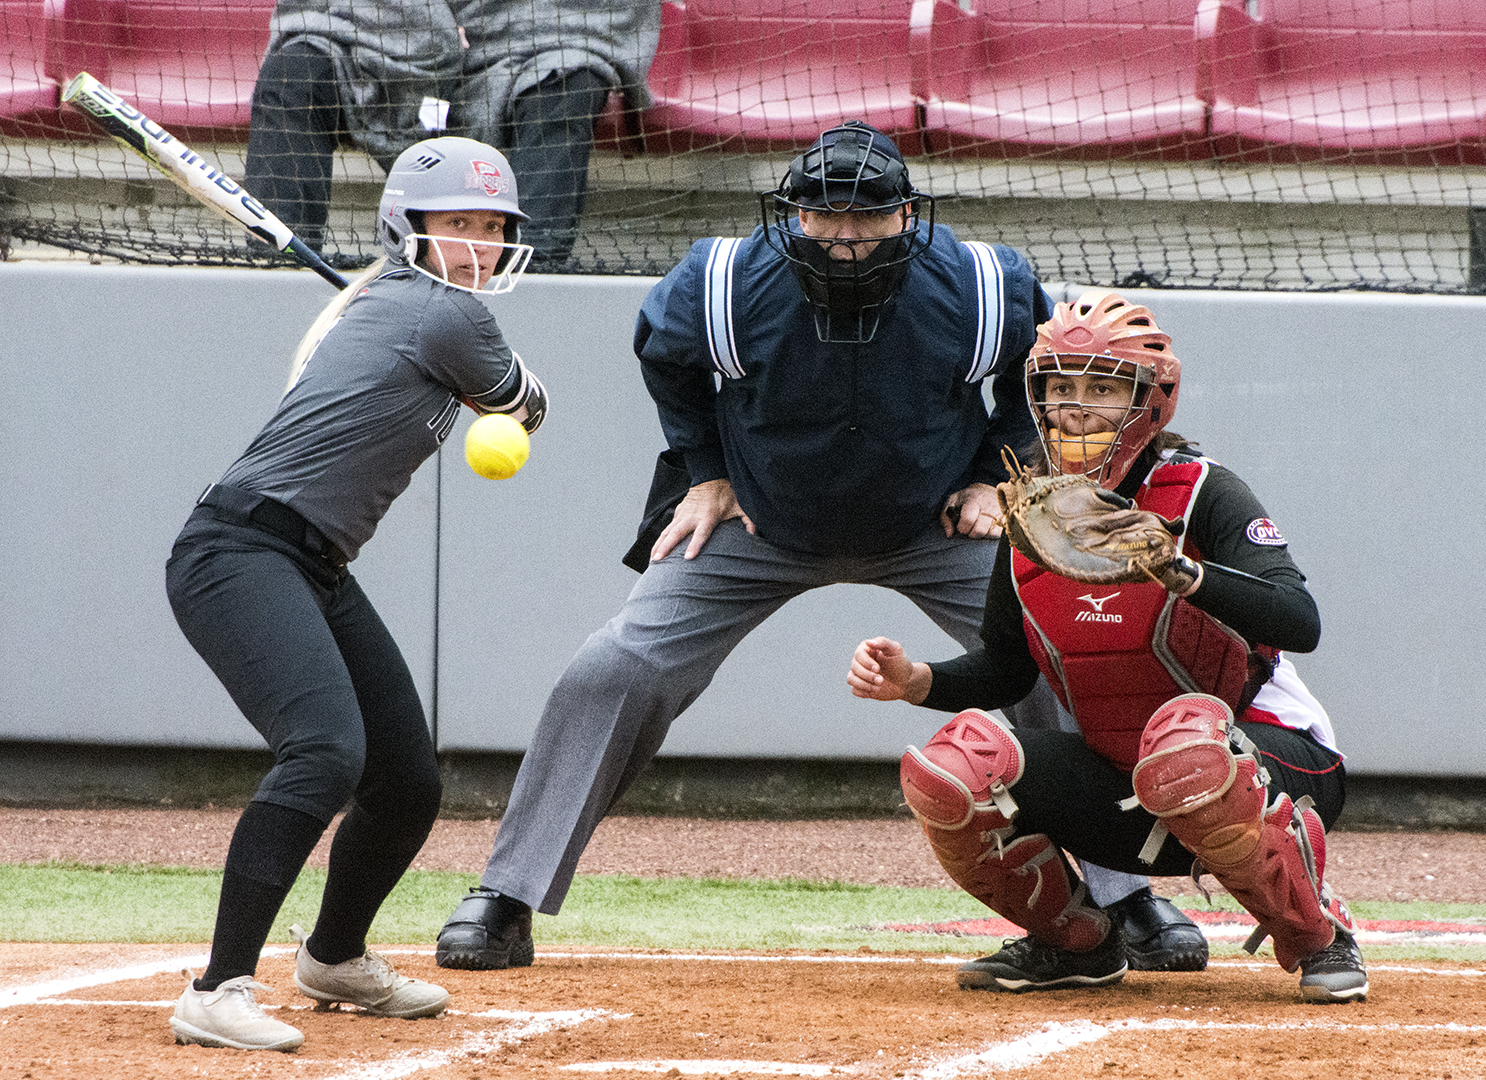 On Wednesday, March 7, the WKU Softball team took on the SIUE Cougars at the WKU Softball field. The Hilltoppers won the game 10-4 after coming back from a 2-0 deficit in the 3rd inning.